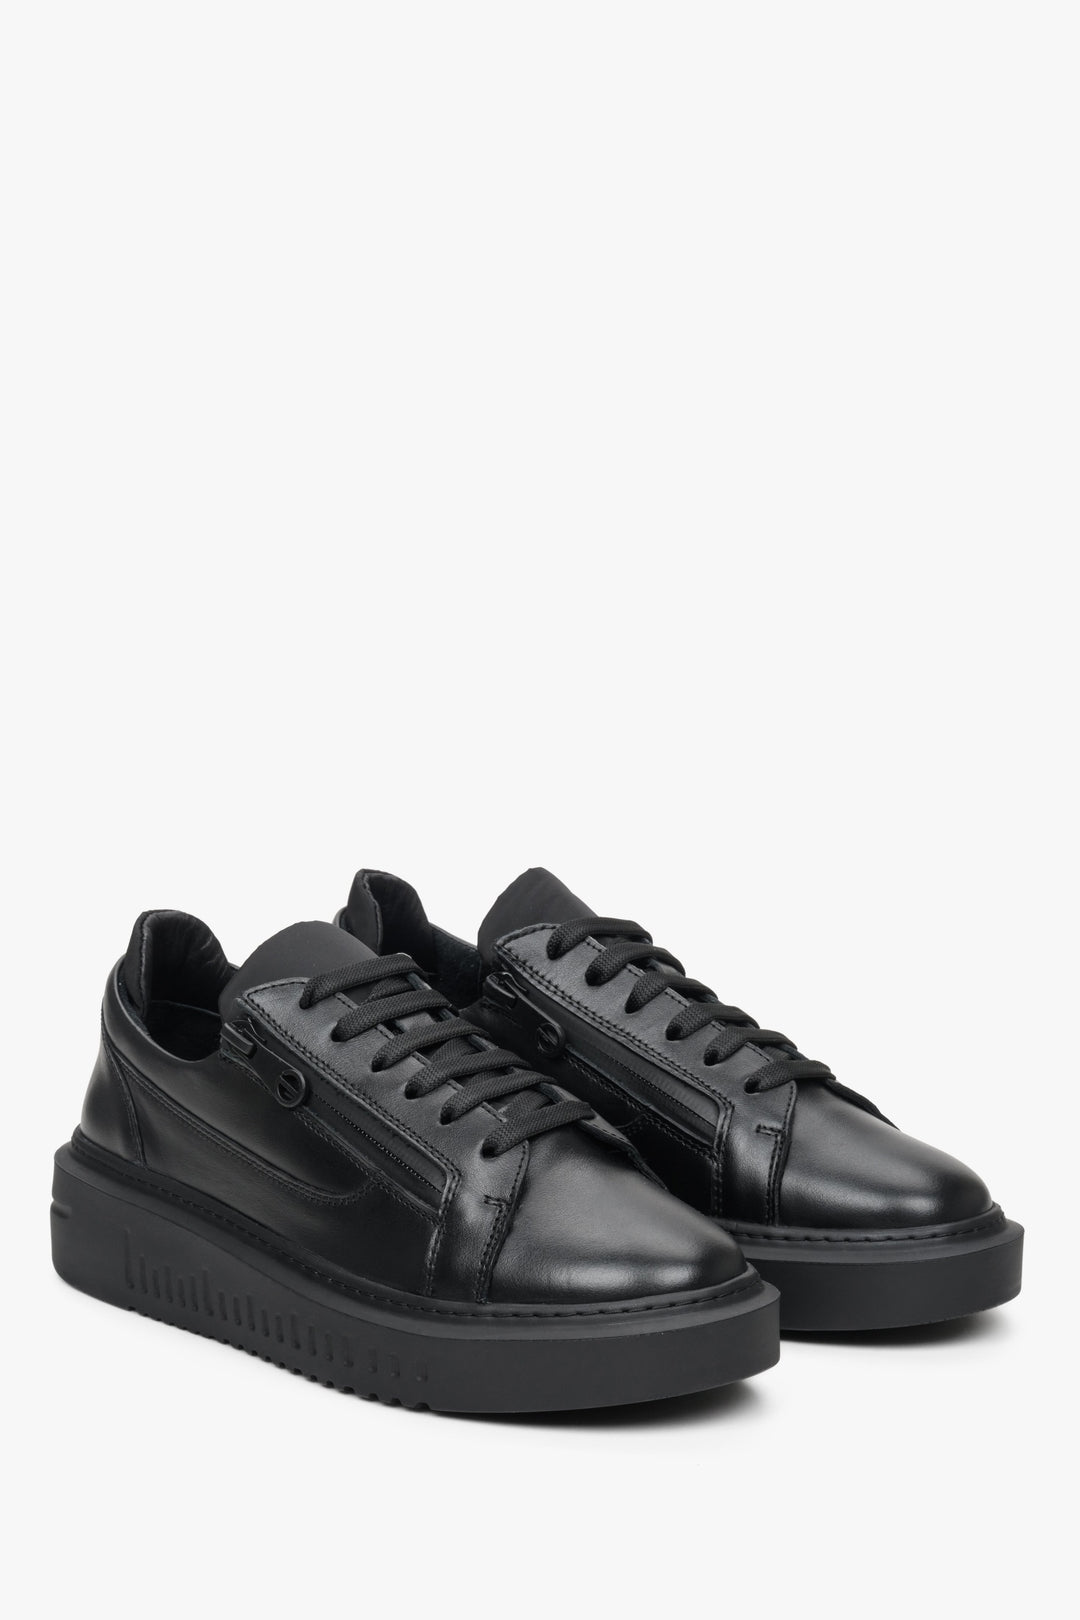 Leather, women's black sneakers by Estro with laces and decorative zipper - presentation of the shoe's toe and side seam.